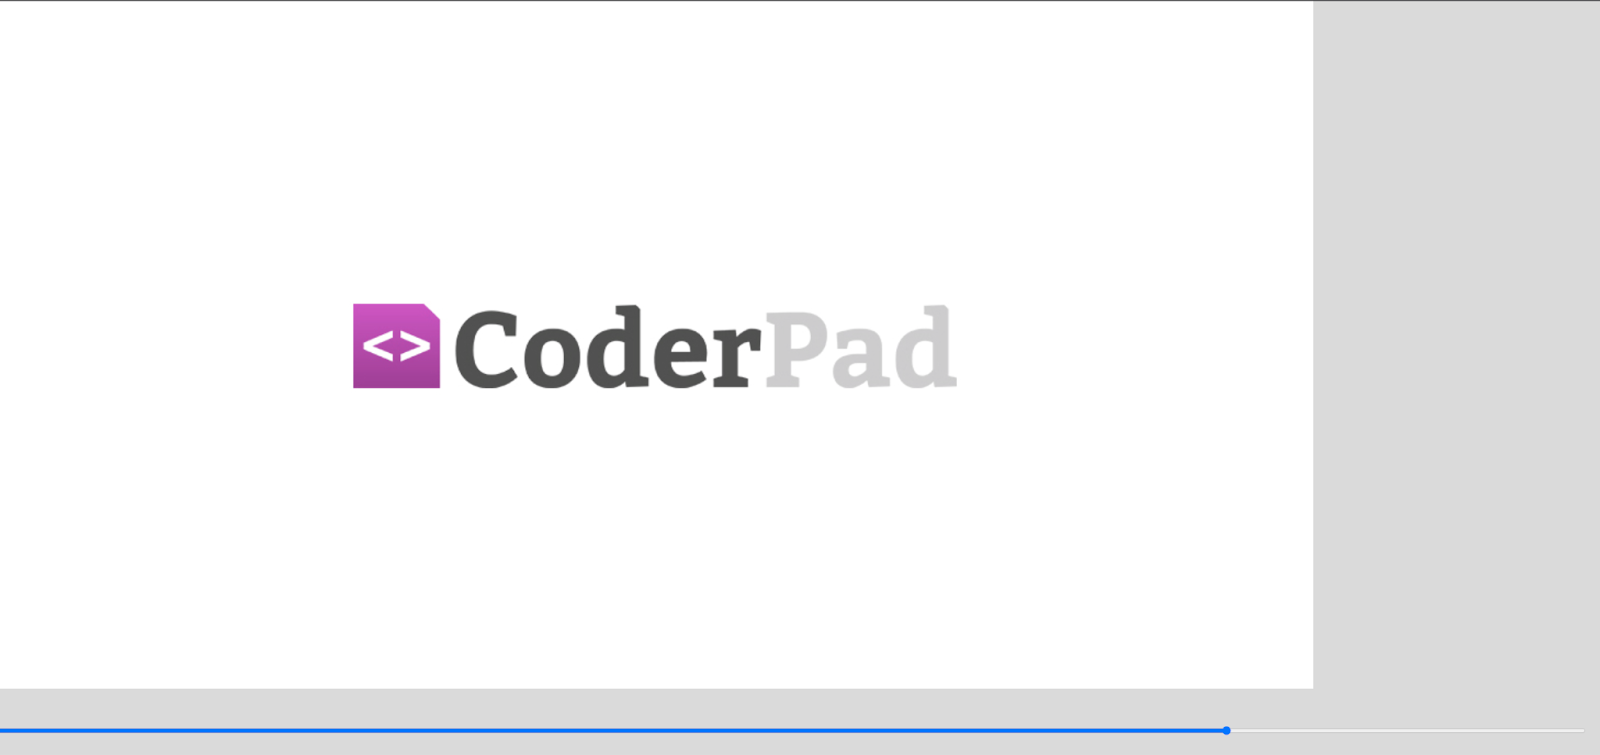 The CoderPad logo with a hue-rotate effect applied